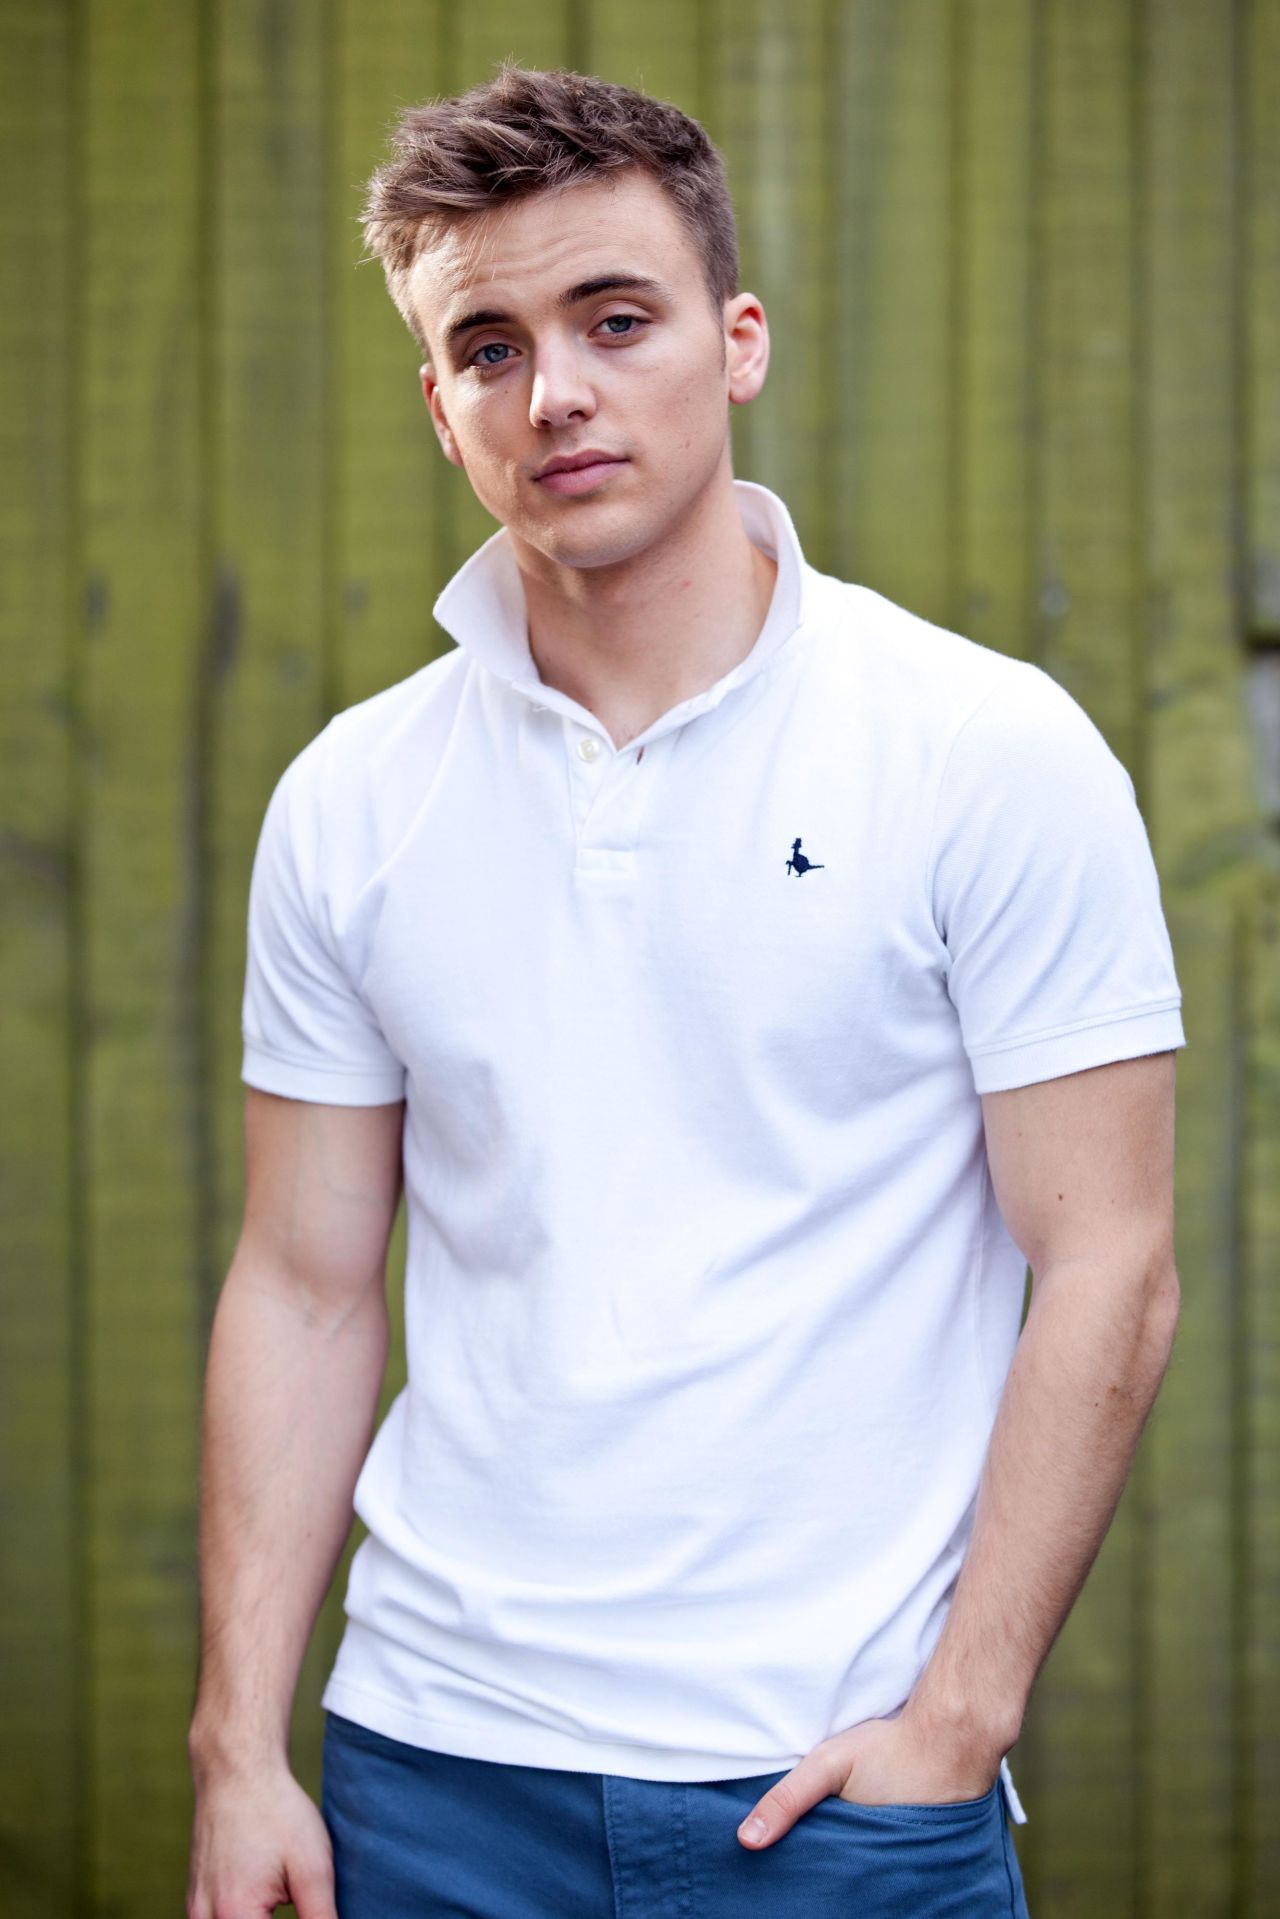 Hollyoaks actor Parry Glasspool suspended from show for 